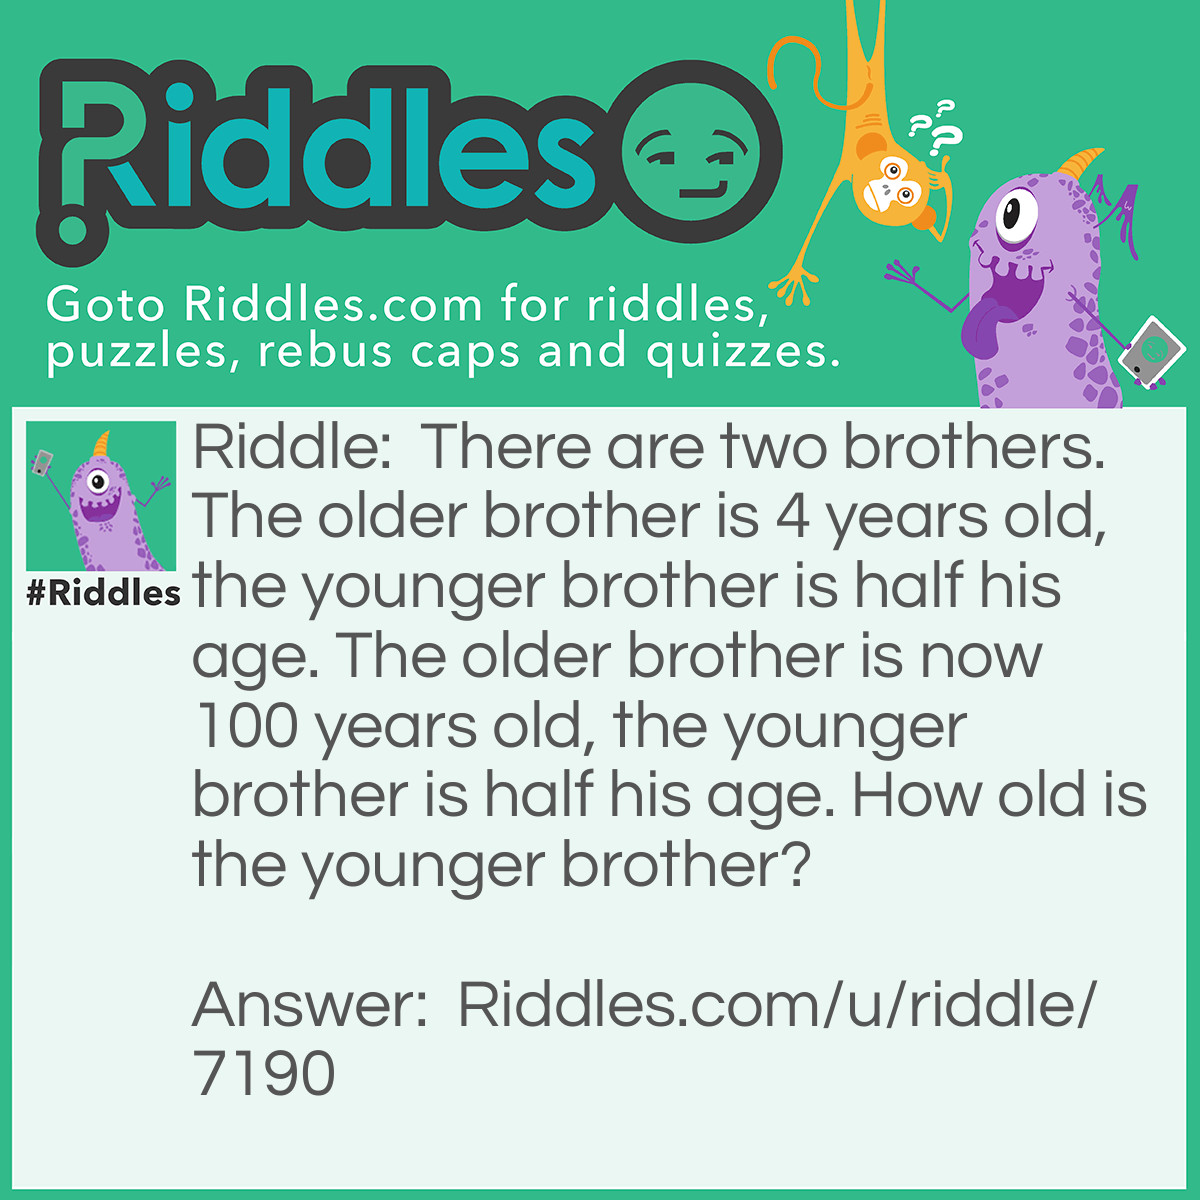 Riddle: There are two brothers. The older brother is 4 years old, the younger brother is half his age. The older brother is now 100 years old, the younger brother is half his age. How old is the younger brother? Answer: Younger brother is 98 years old